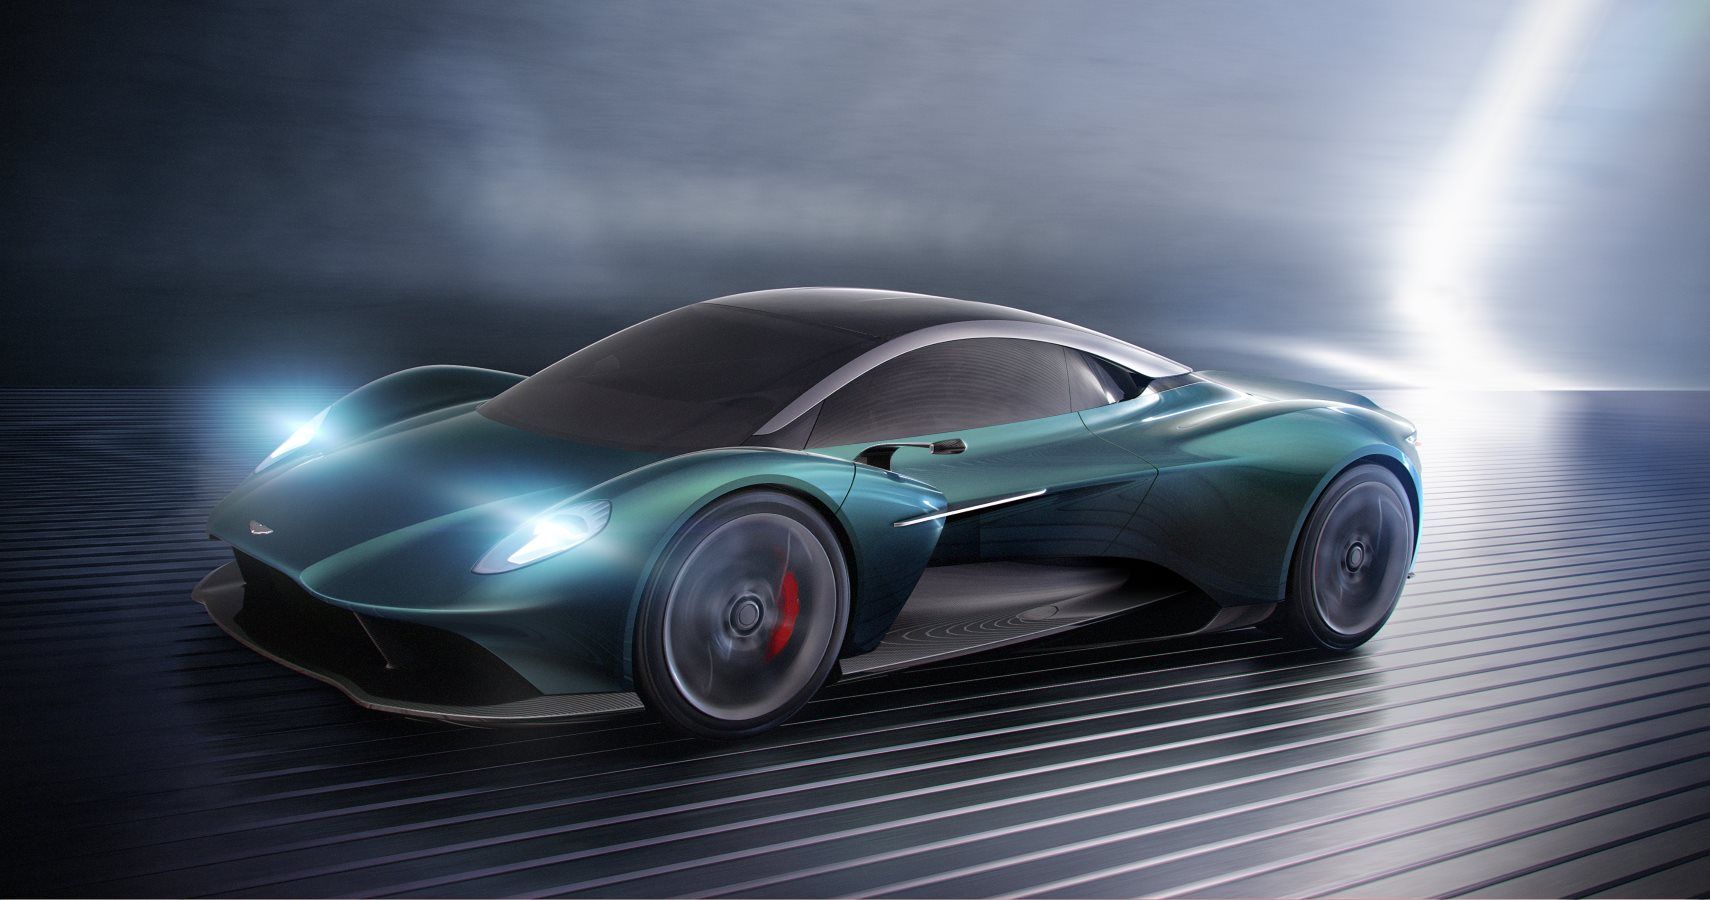 Next-Gen Aston Martin Vanquish Coming With Mid-Engine Layout And Manual Transmission